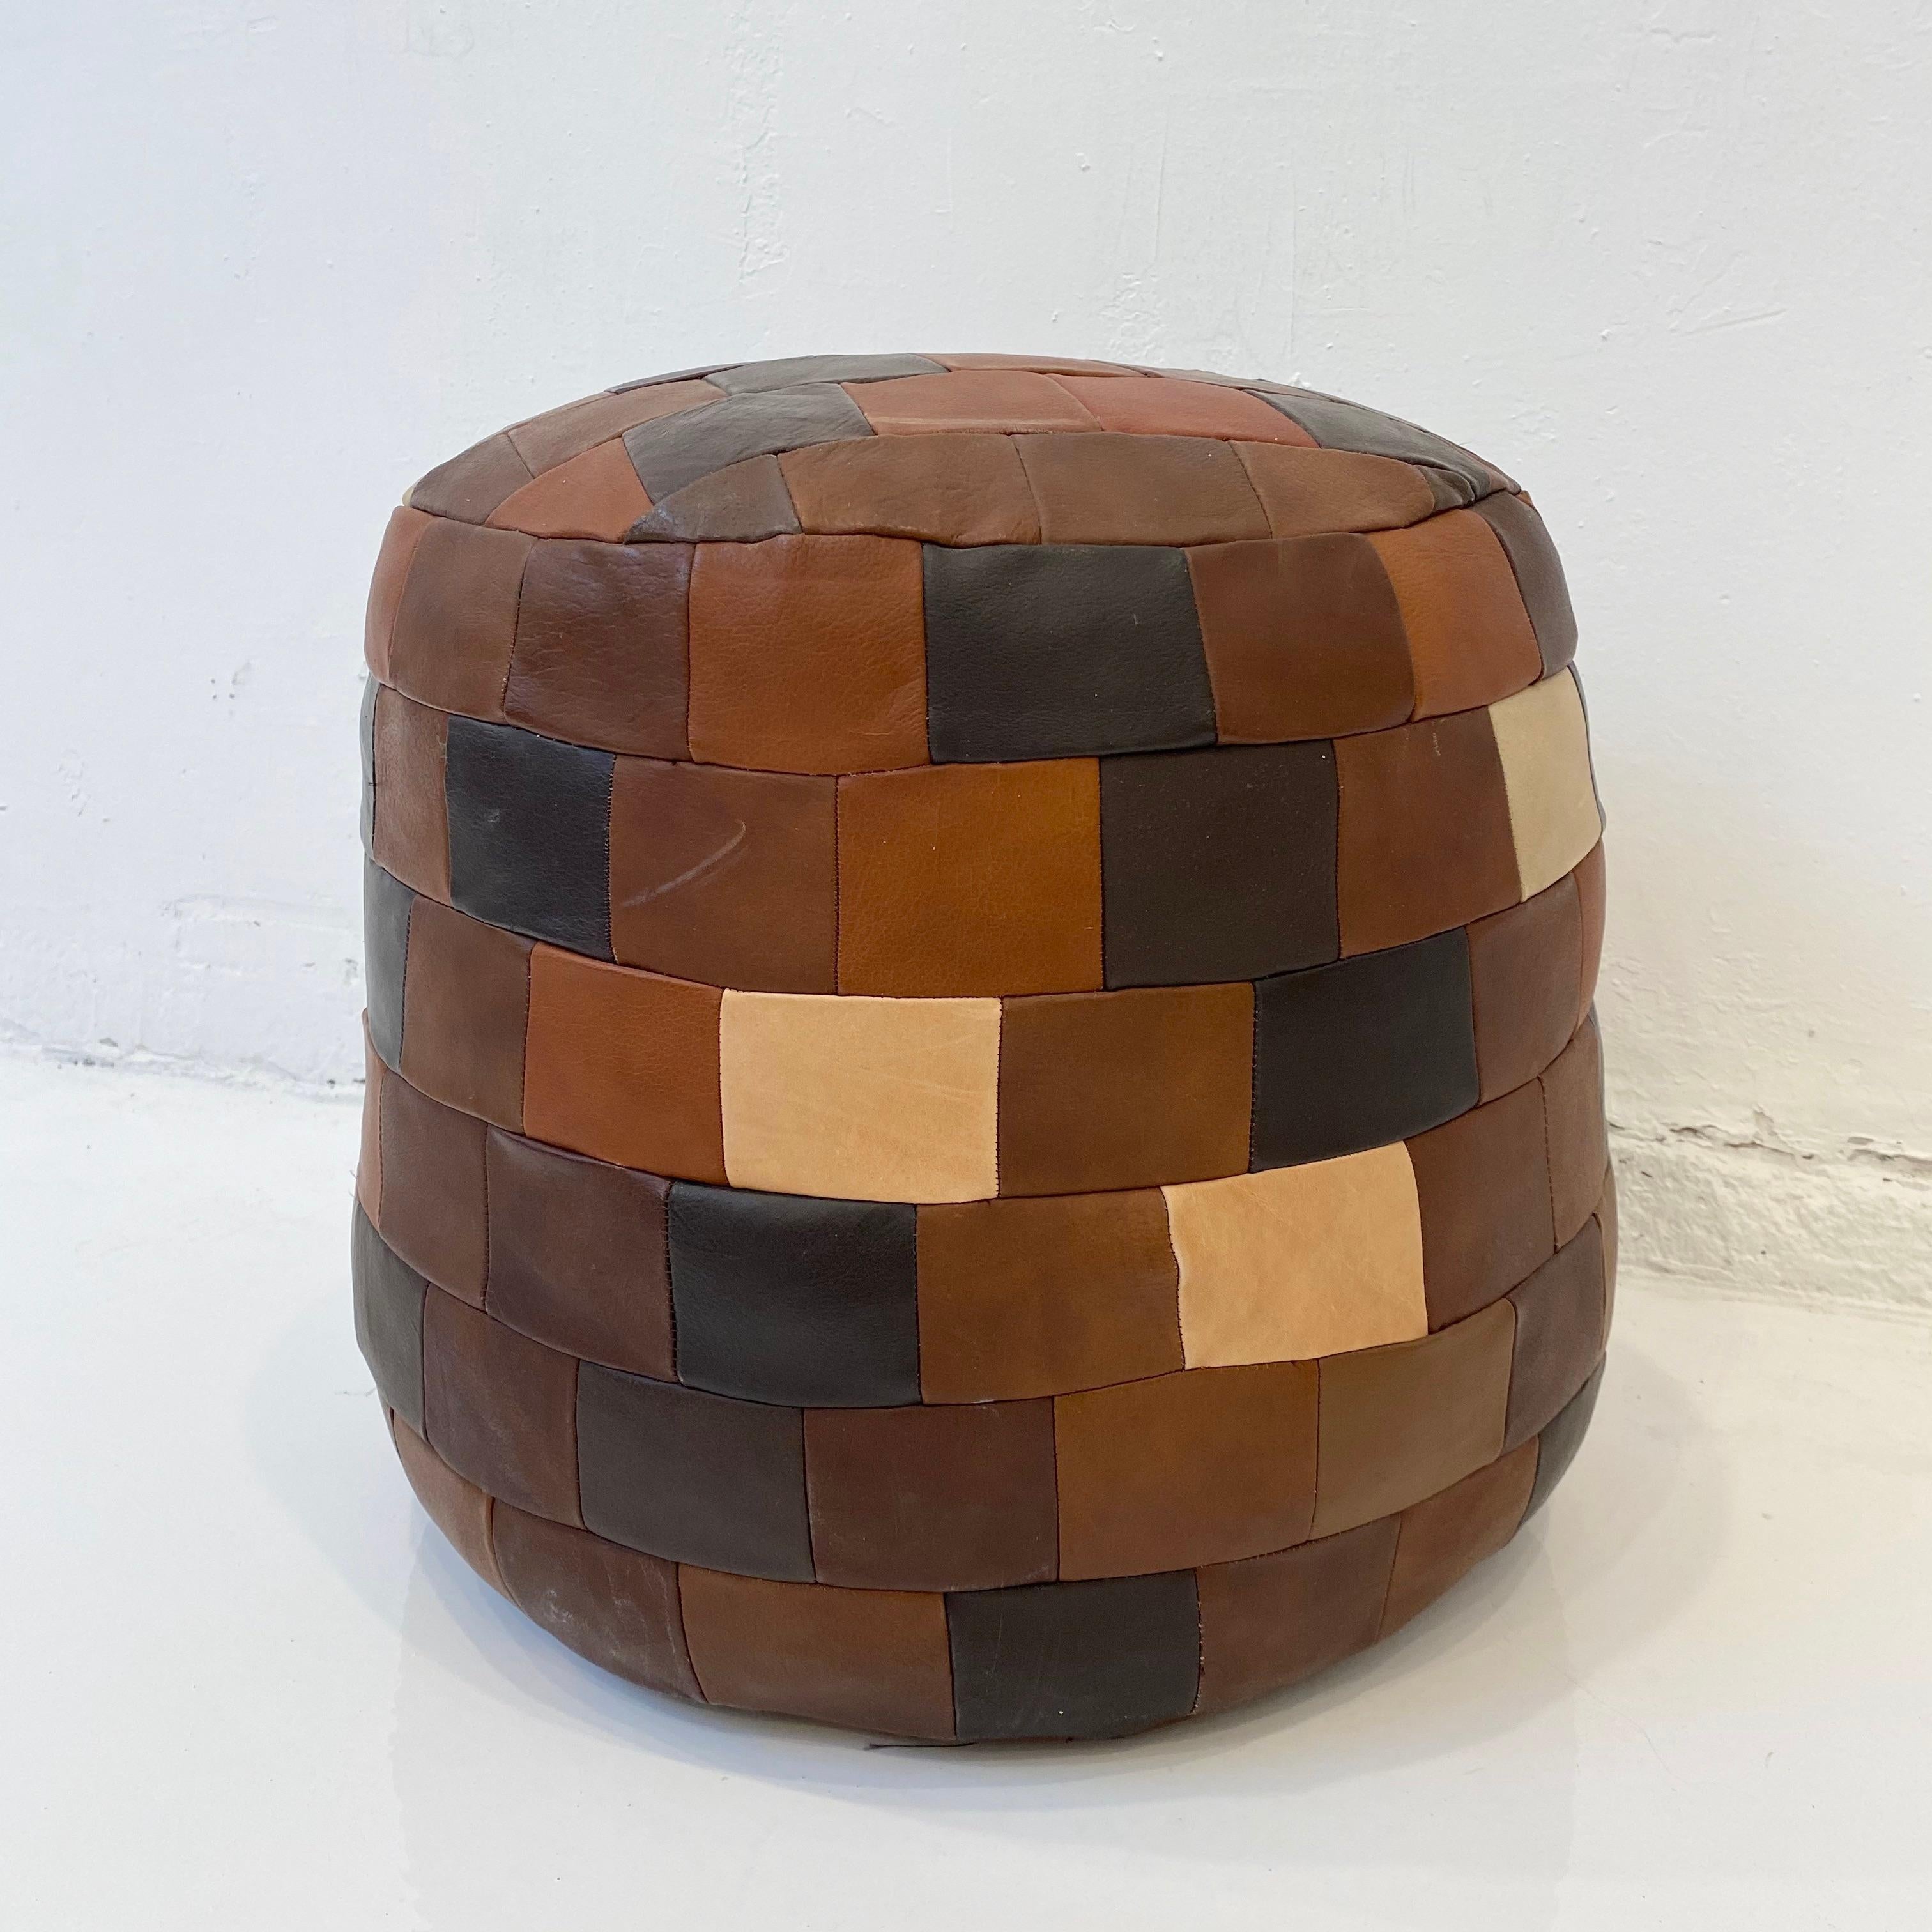 Unique patchwork leather ottoman by De Sede with multi-colored leather strips. Cylinder shape. various brown, tan and green leather colors. Great coloring and patina to leather. Very good condition. Great accent piece.

6-7 ottomans and beanbags